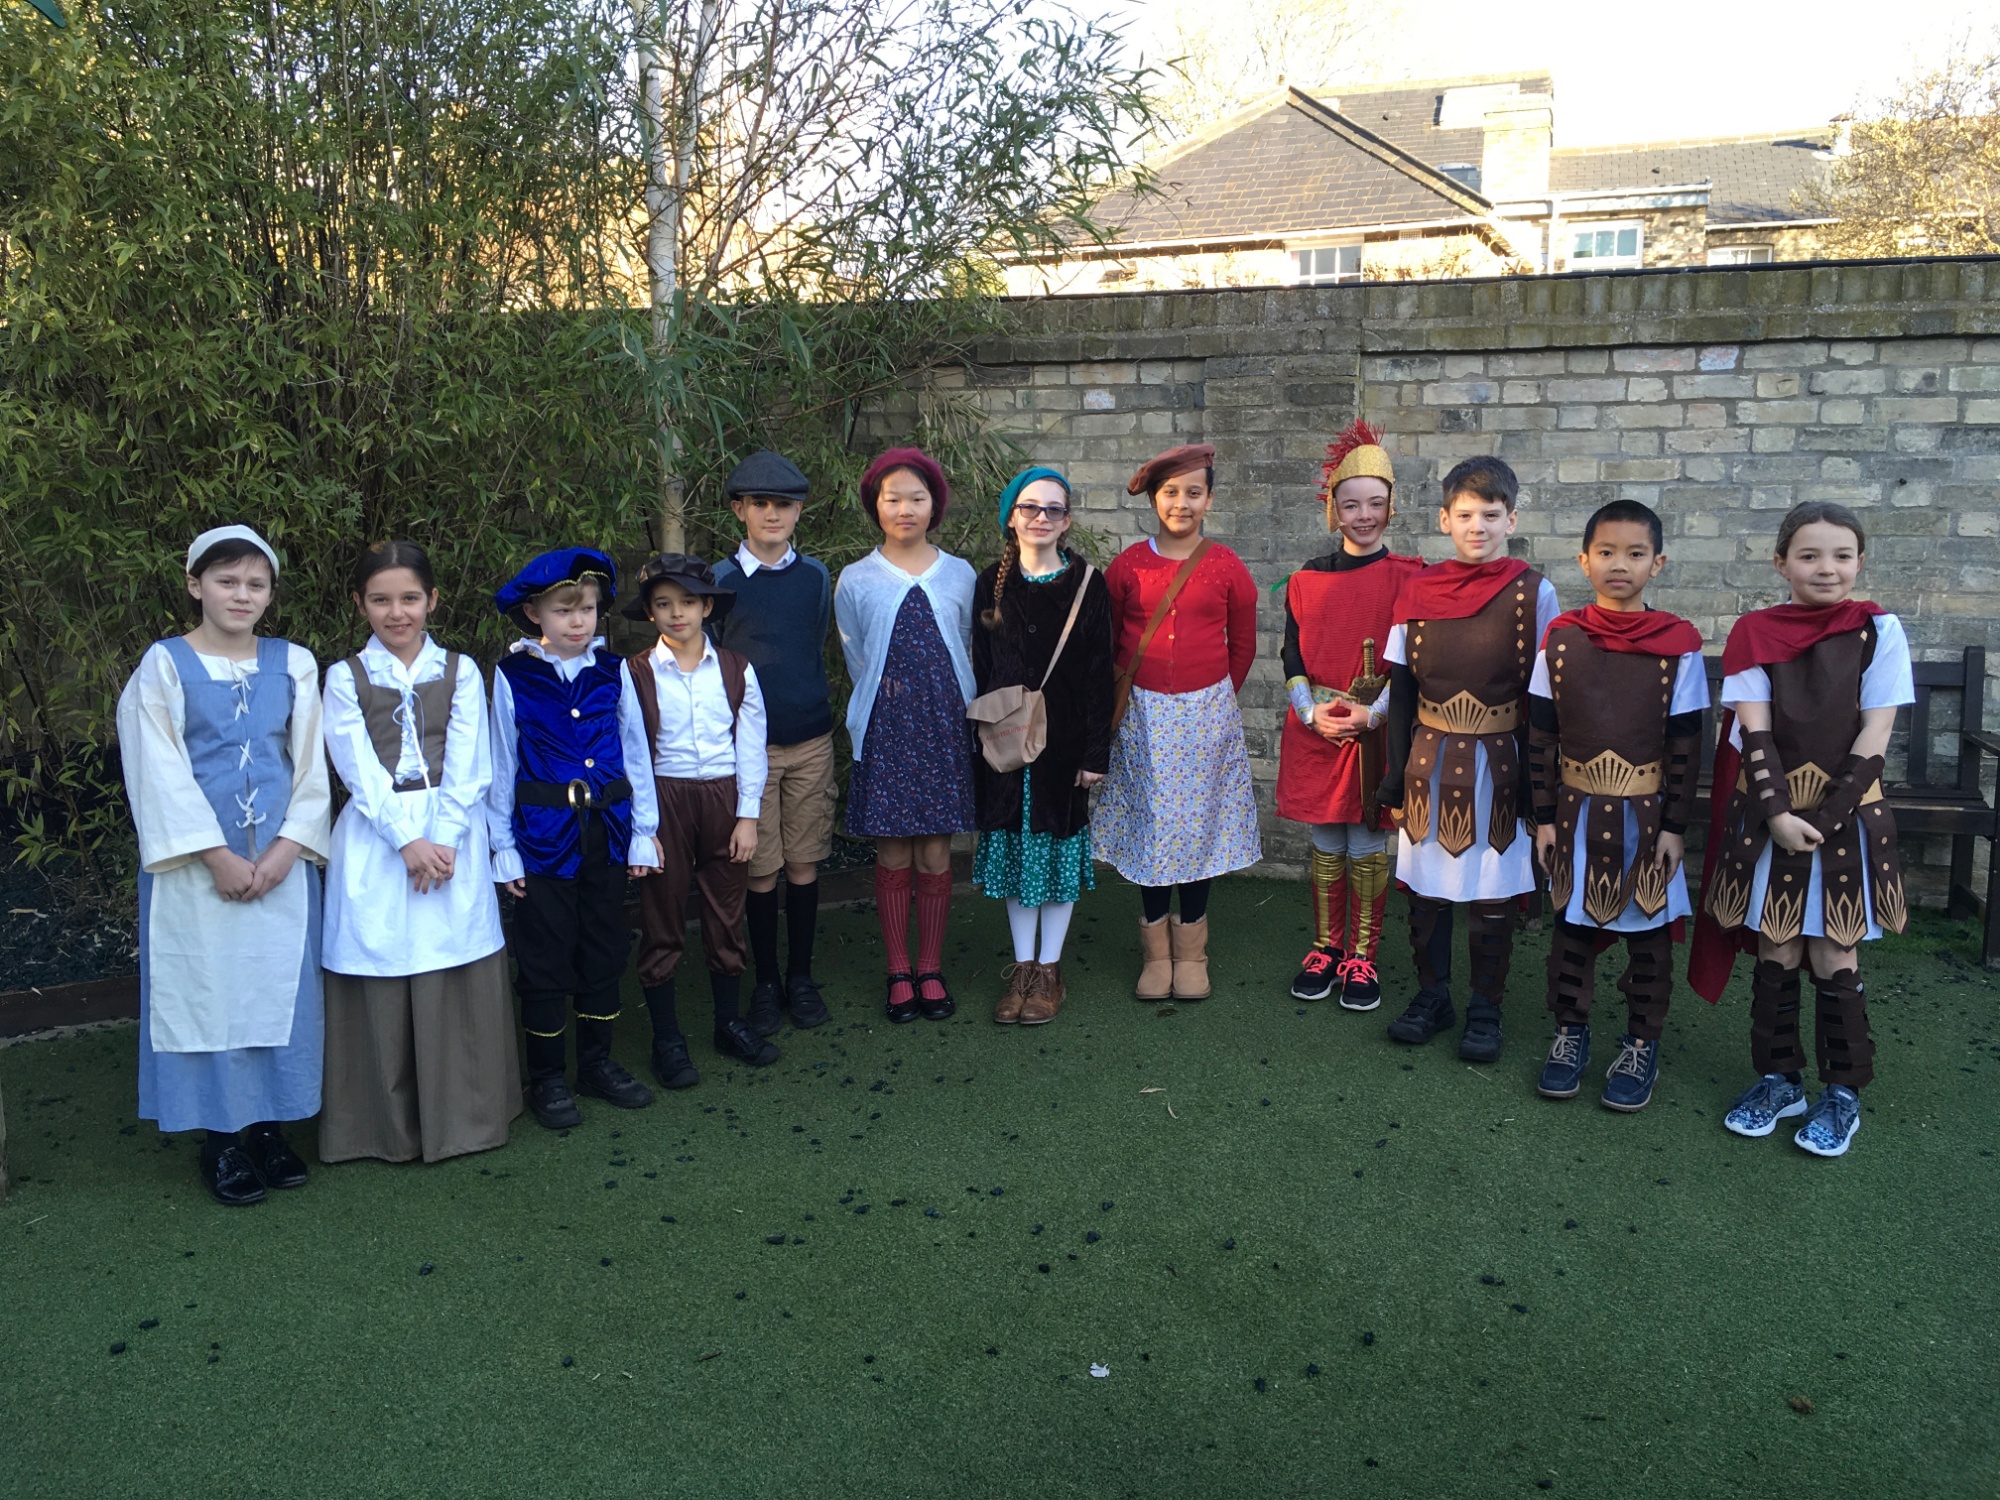 Students in Roman, Tudor and WW2 costumes